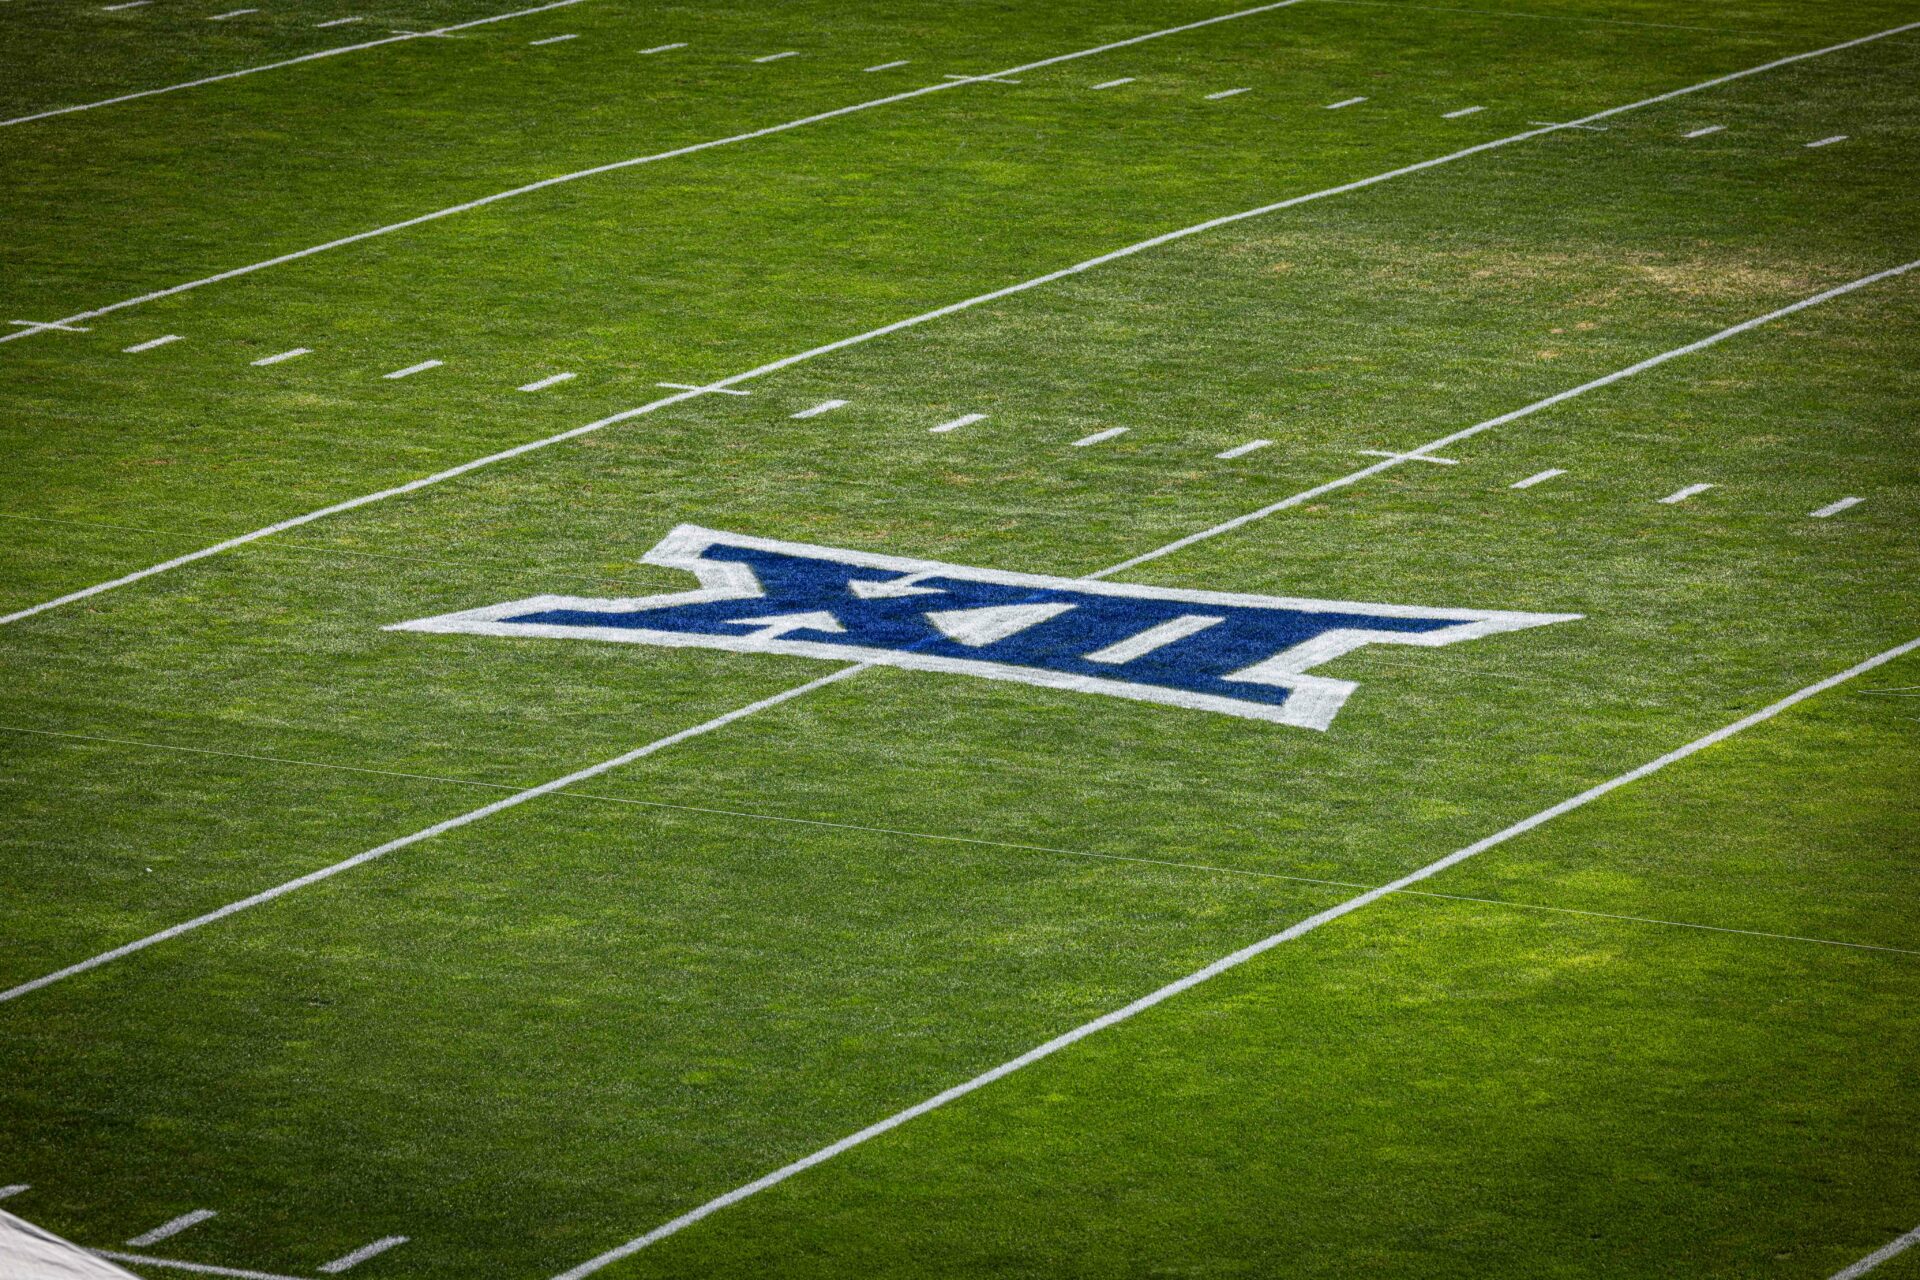 Keep Off the Grass: A New Field is Coming to LaVell Edwards Stadium ...